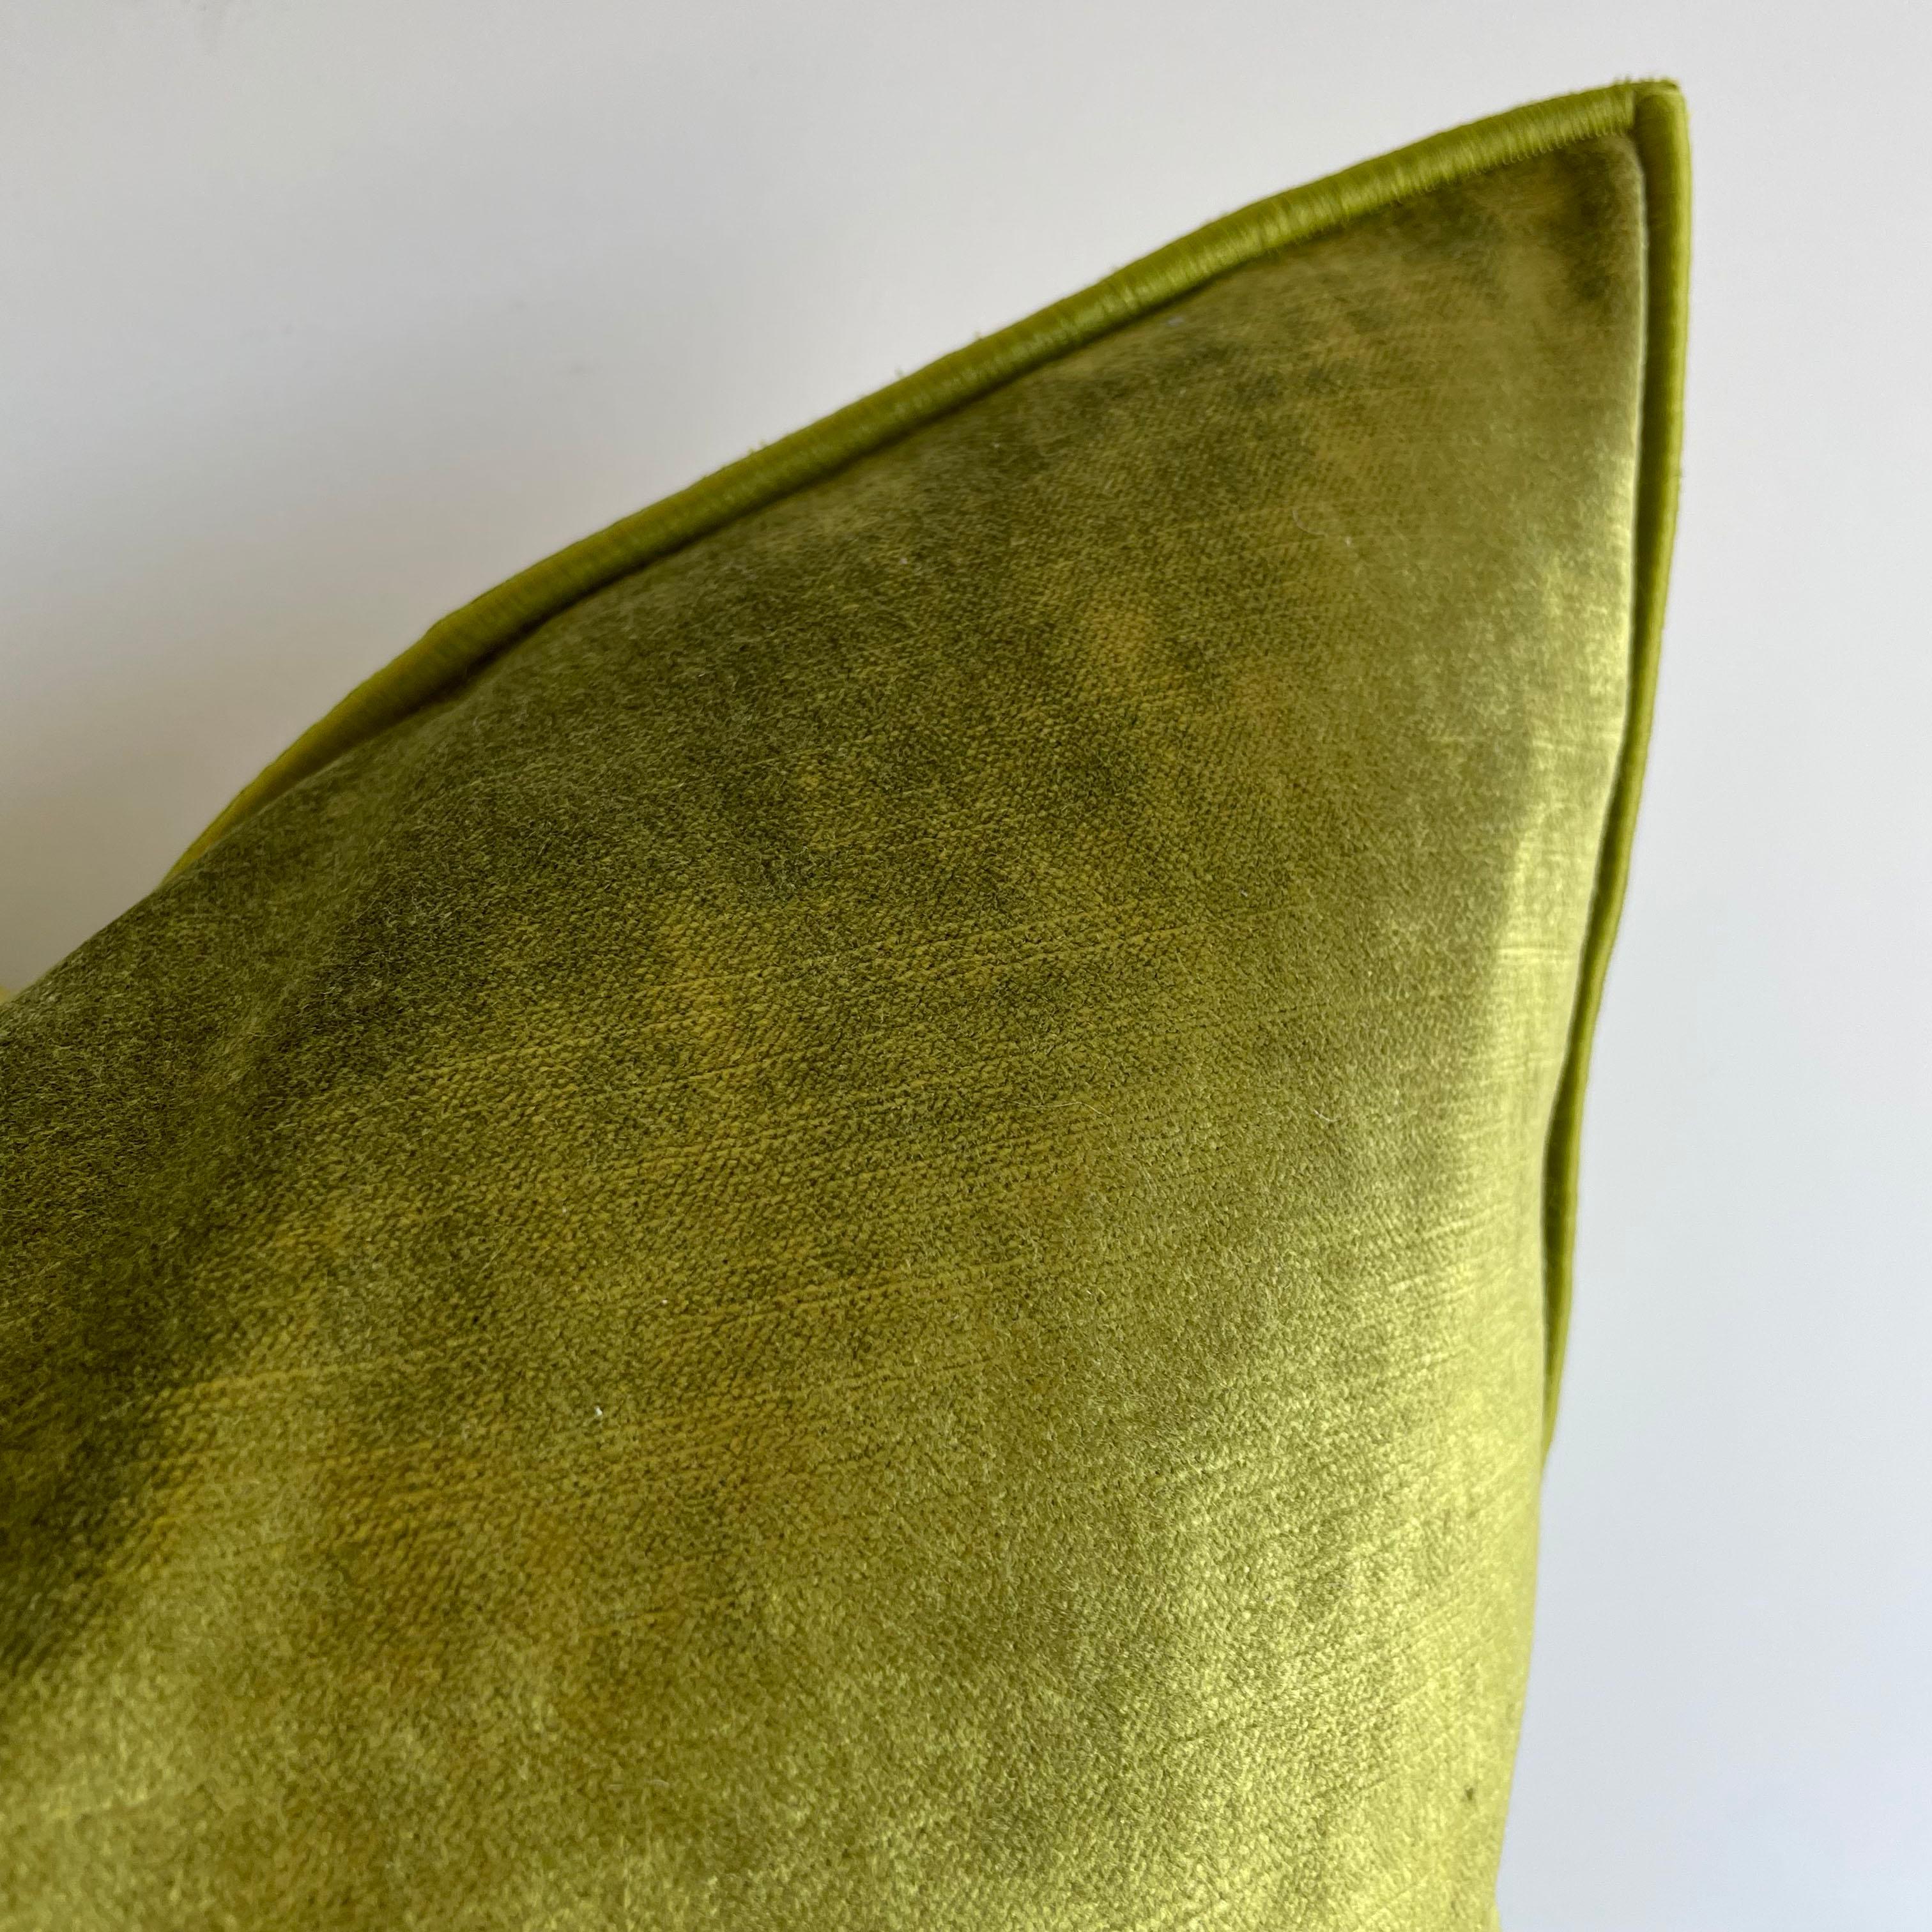 Beautiful French green velvet pillow with binded edge. Metal zipper closure, and leather pull. Custom made in Paris, France. Includes down feather Insert. Limited quants available. 

Size: 20